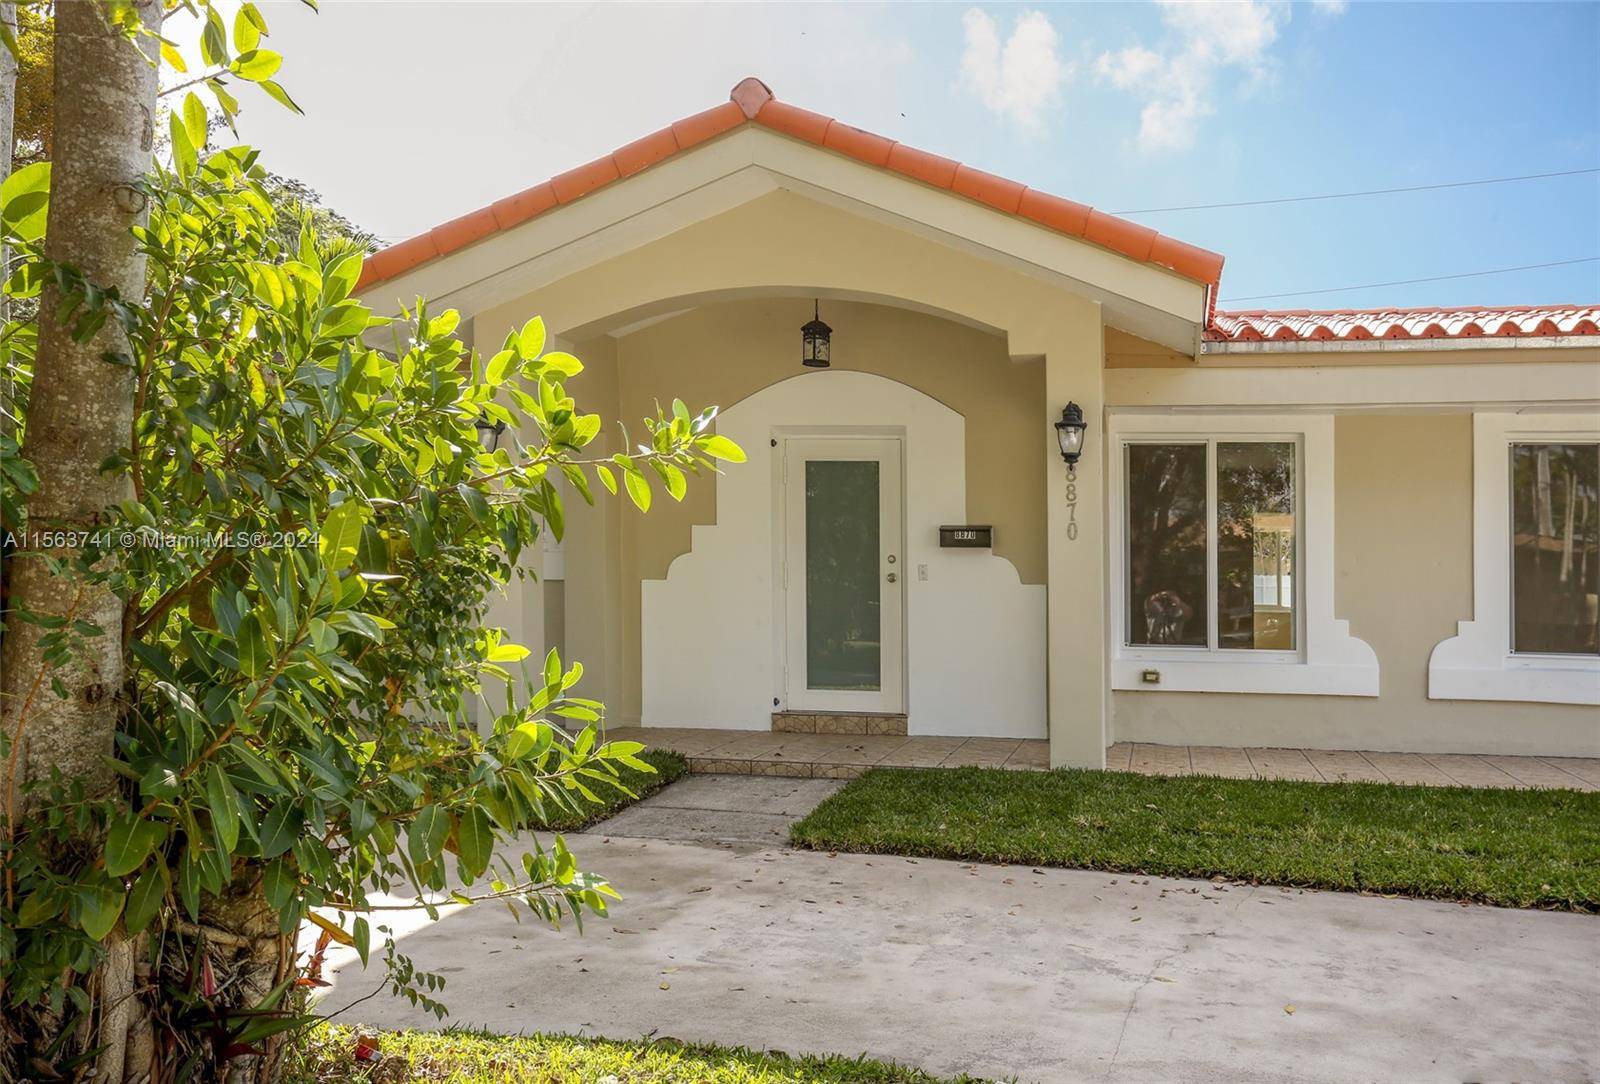 Amazing 4 bedroom 3 bath home in the best location near Baptist Hospital and Downtown Dadeland.